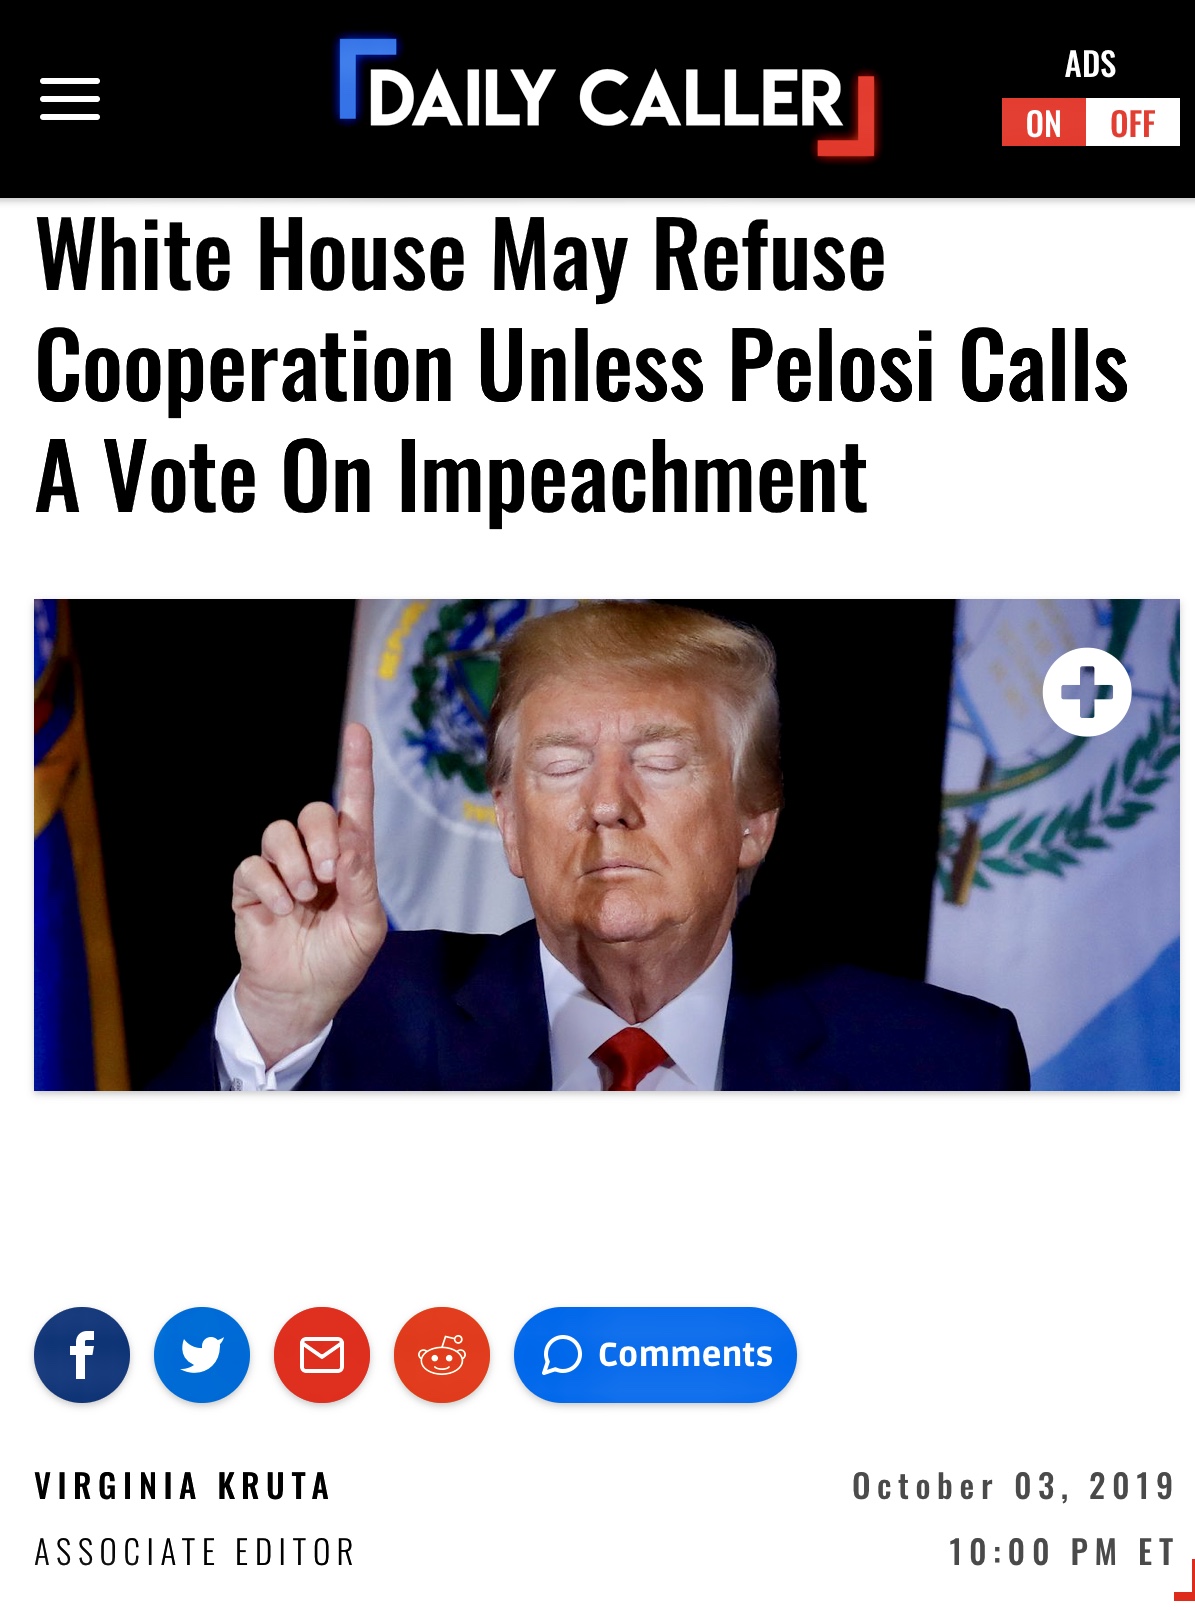 White House May Refuse Cooperation Unless Pelosi Calls A Vote On Impeachment